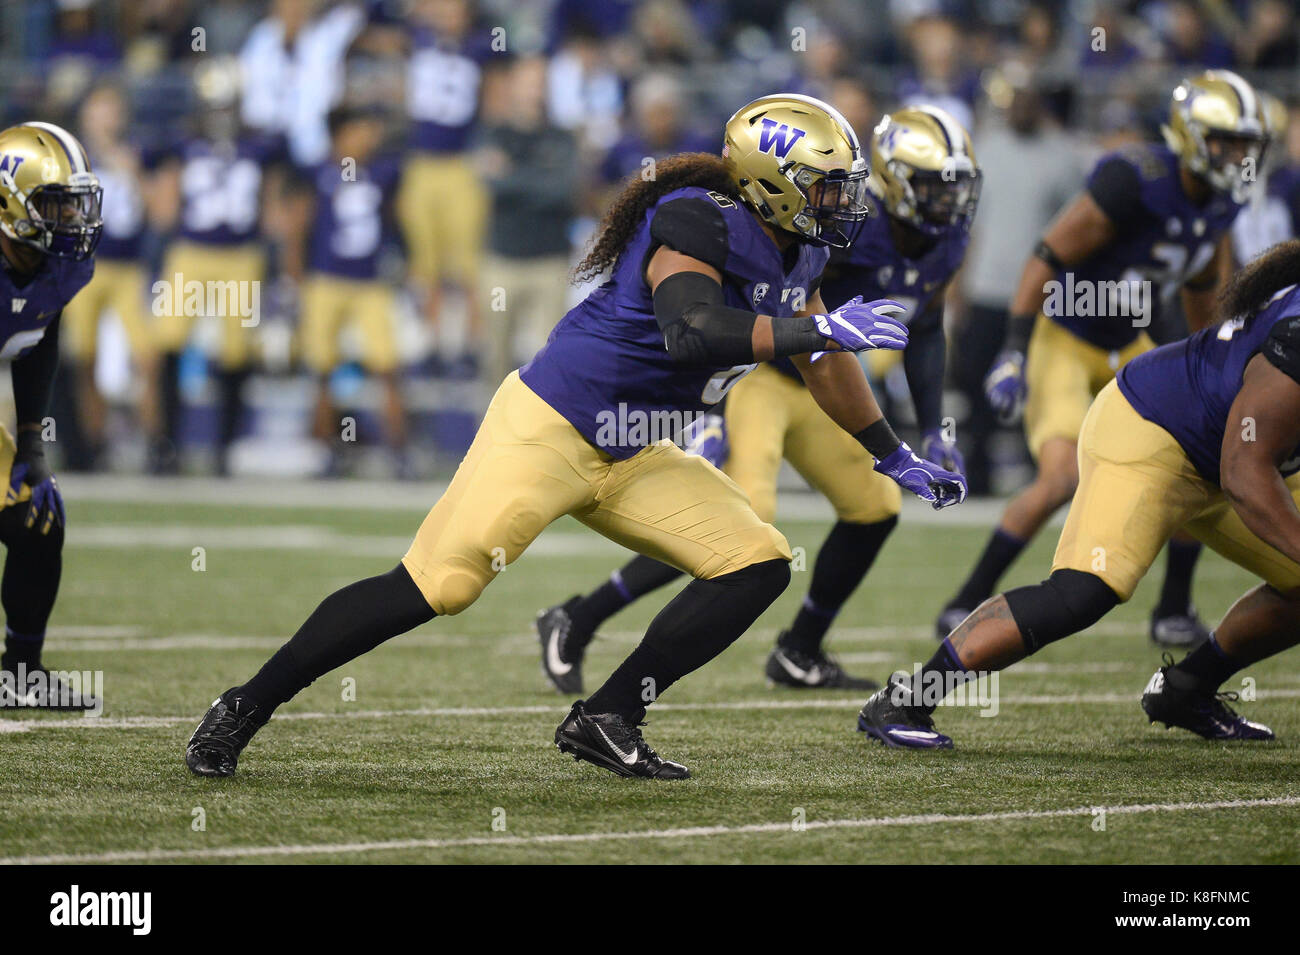 Seattle, WA, USA. 16th Sep, 2017. UW linebacker Benning Potoa'e (8) in action during an NCAA football game between the Fresno State Bulldogs and the Washington Huskies. The game was played at Husky Stadium in Seattle, WA. Jeff Halstead/CSM/Alamy Live News Stock Photo